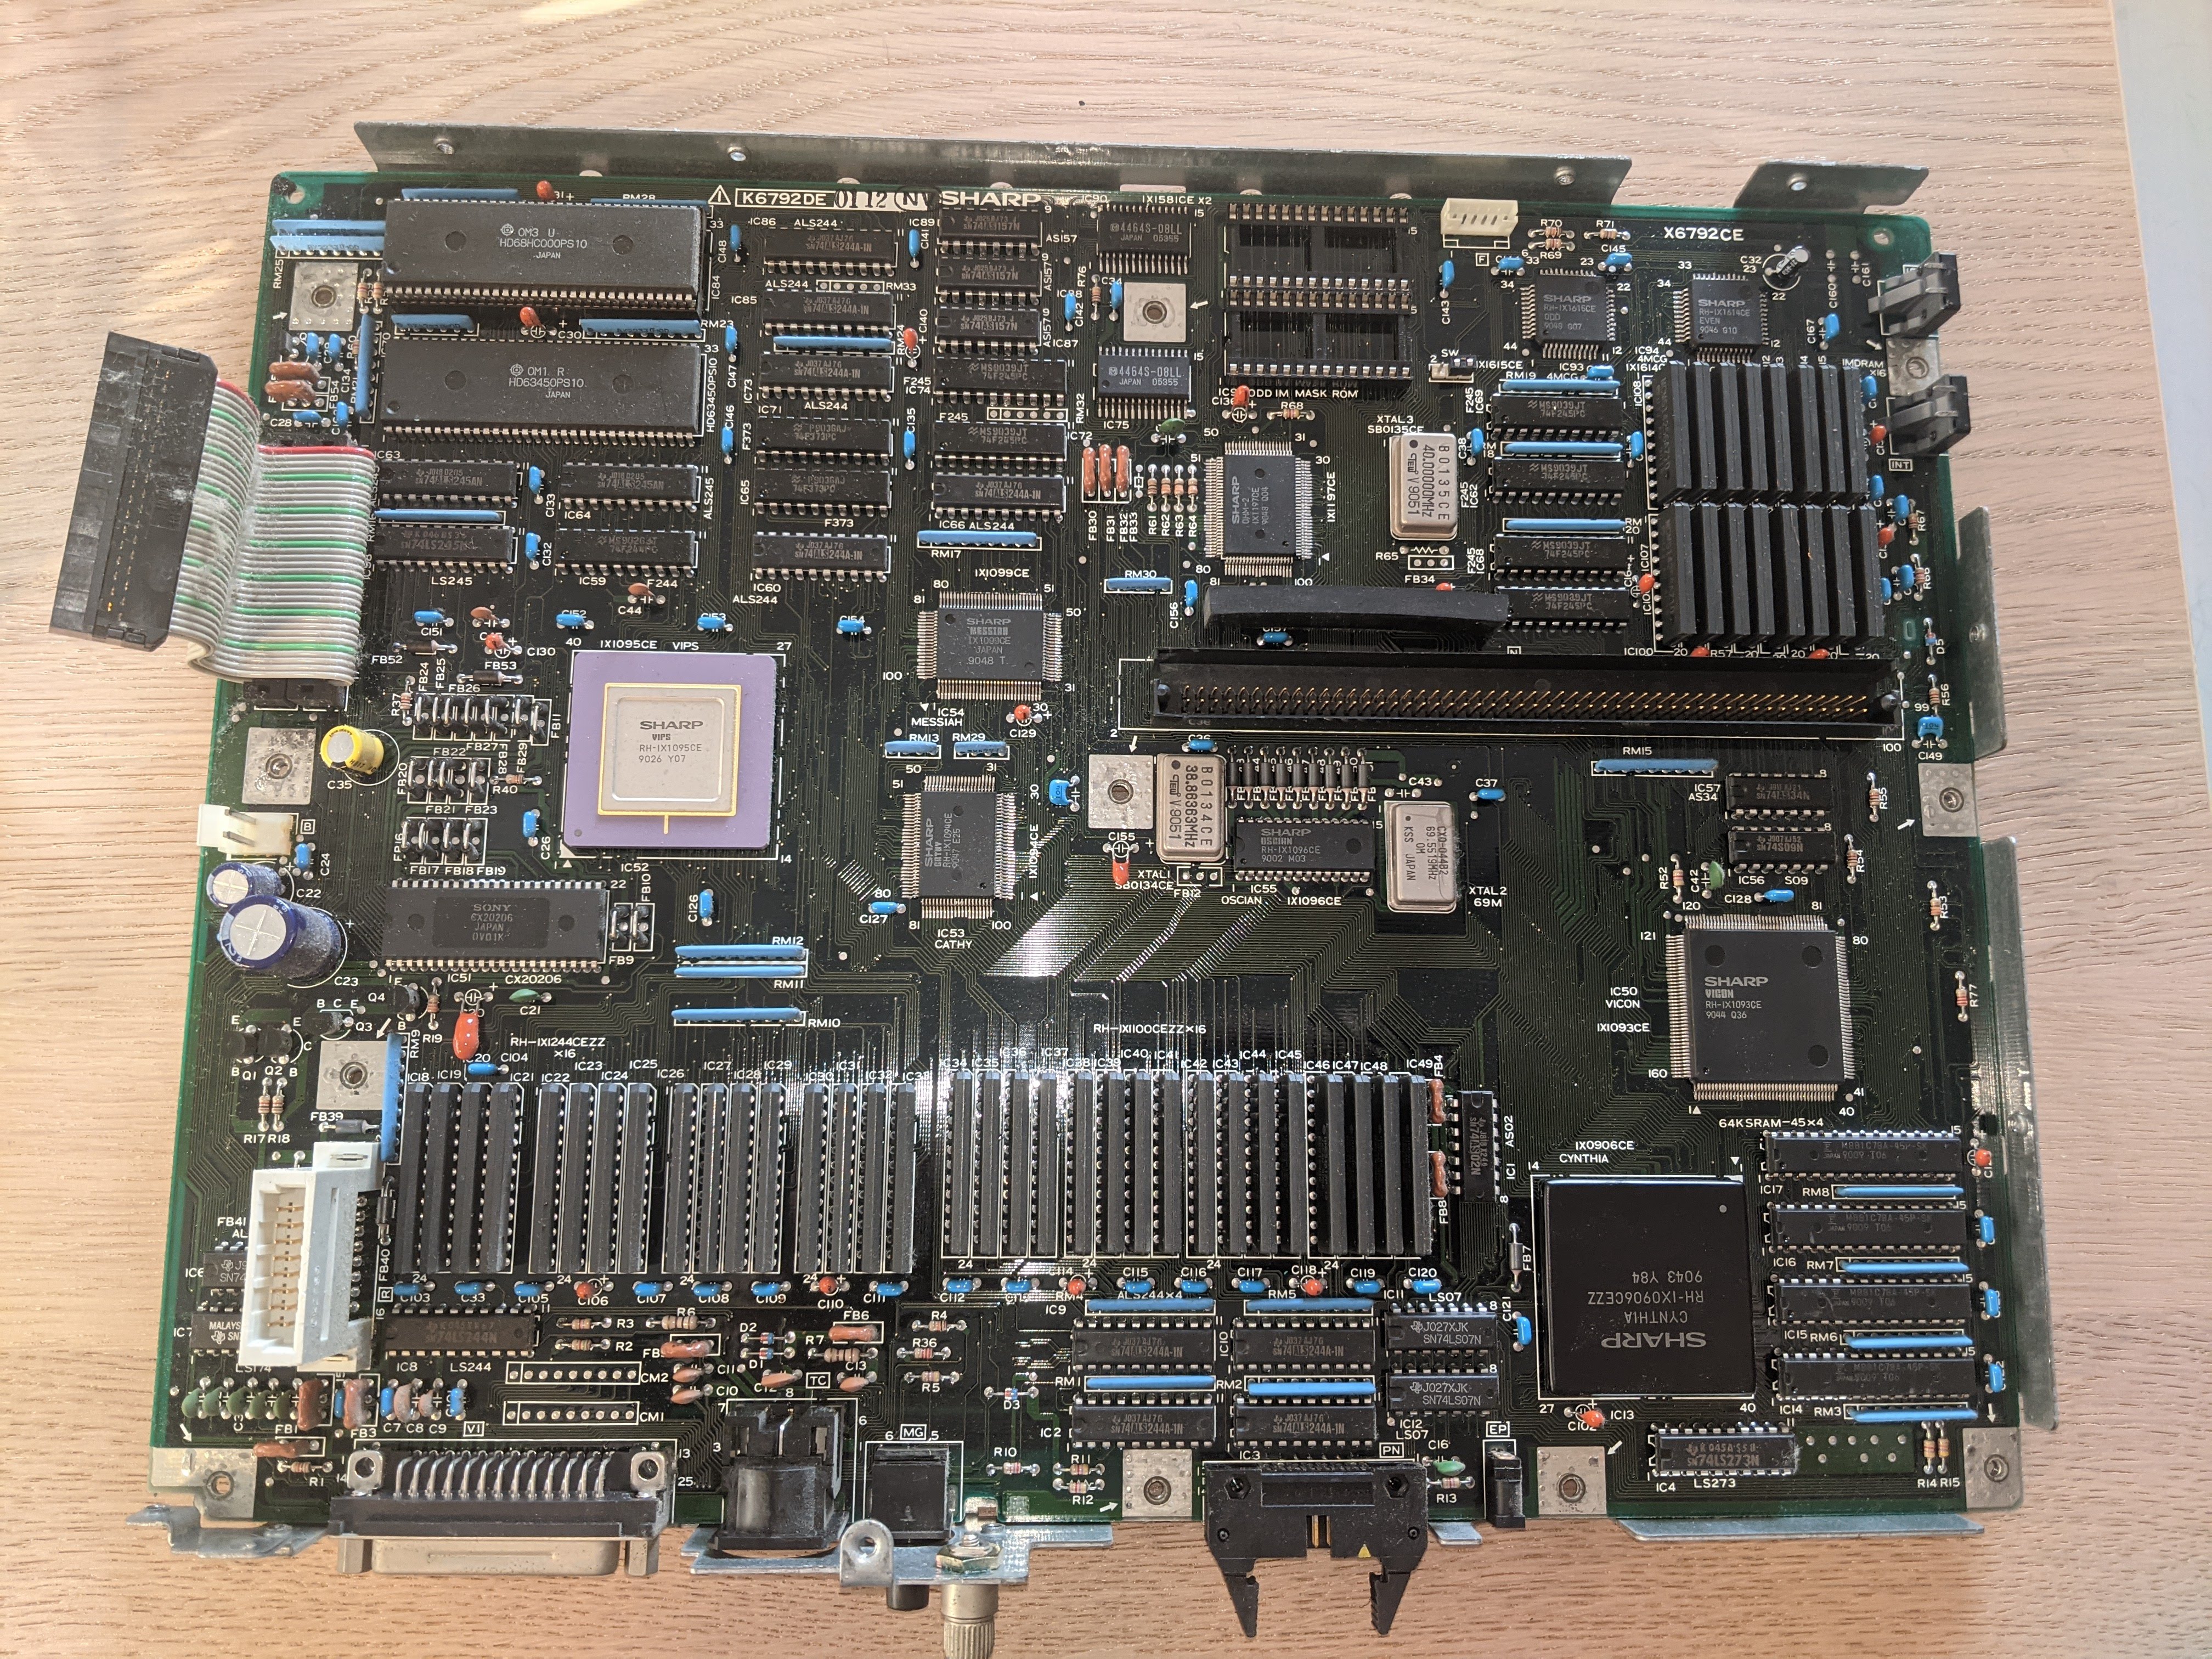 X68000 motherboard